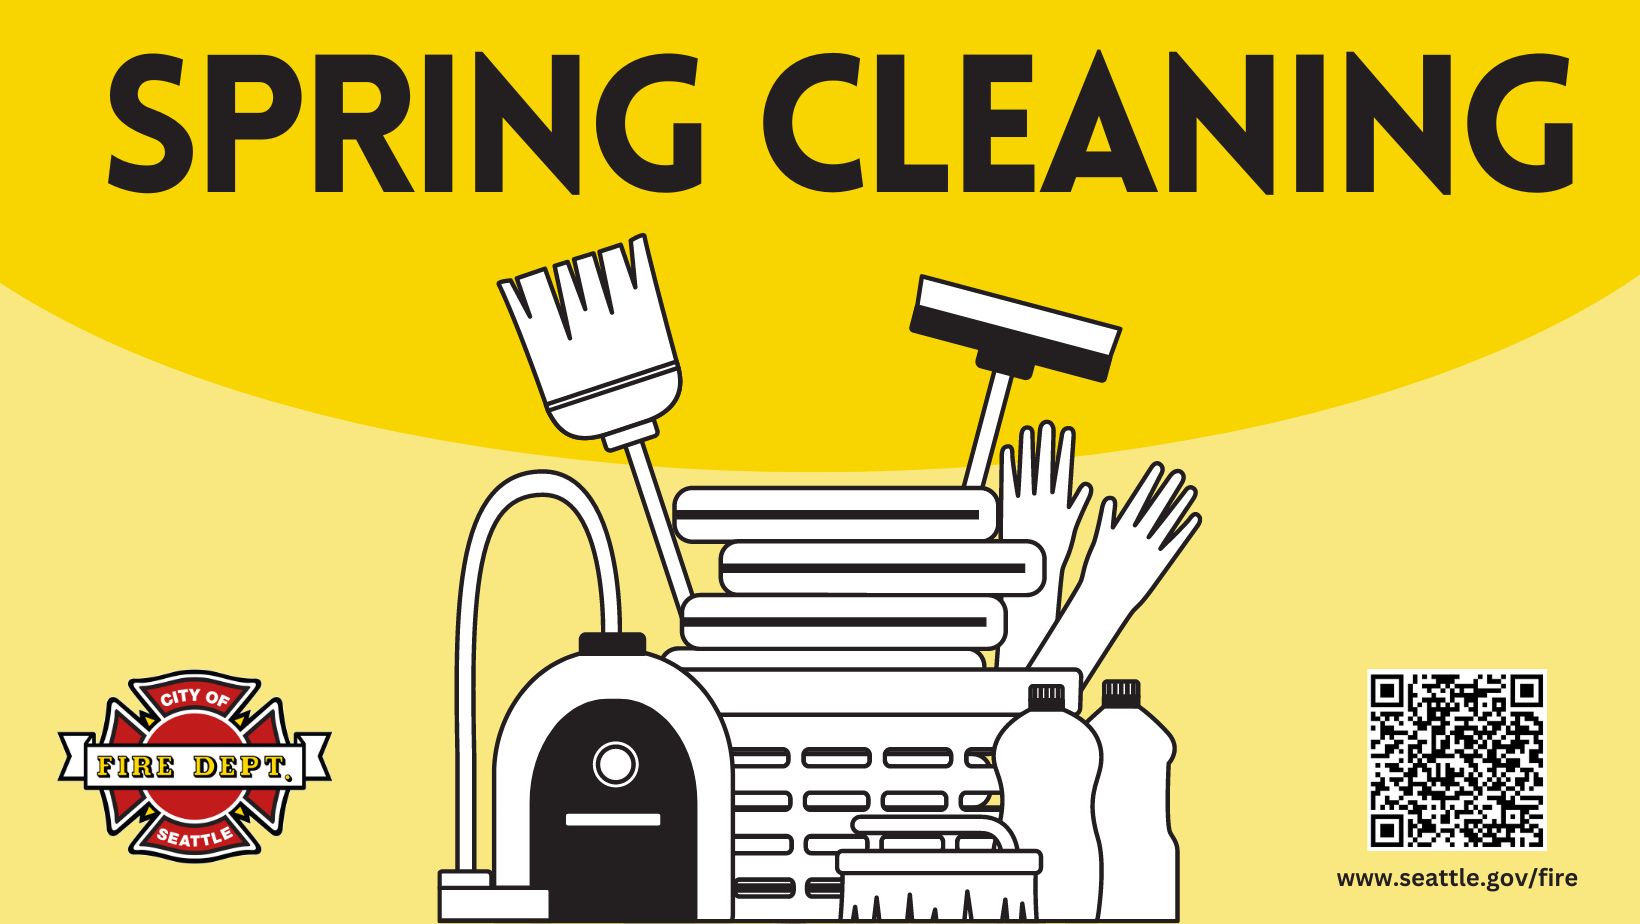 Page banner with deep yellow and light yellow background with the works Spring Cleaning across the top of an image of housecleaning tools. SFD logo appears on the left bottom and QR code to SFD's fire & life safety videos appears on the bottom right.